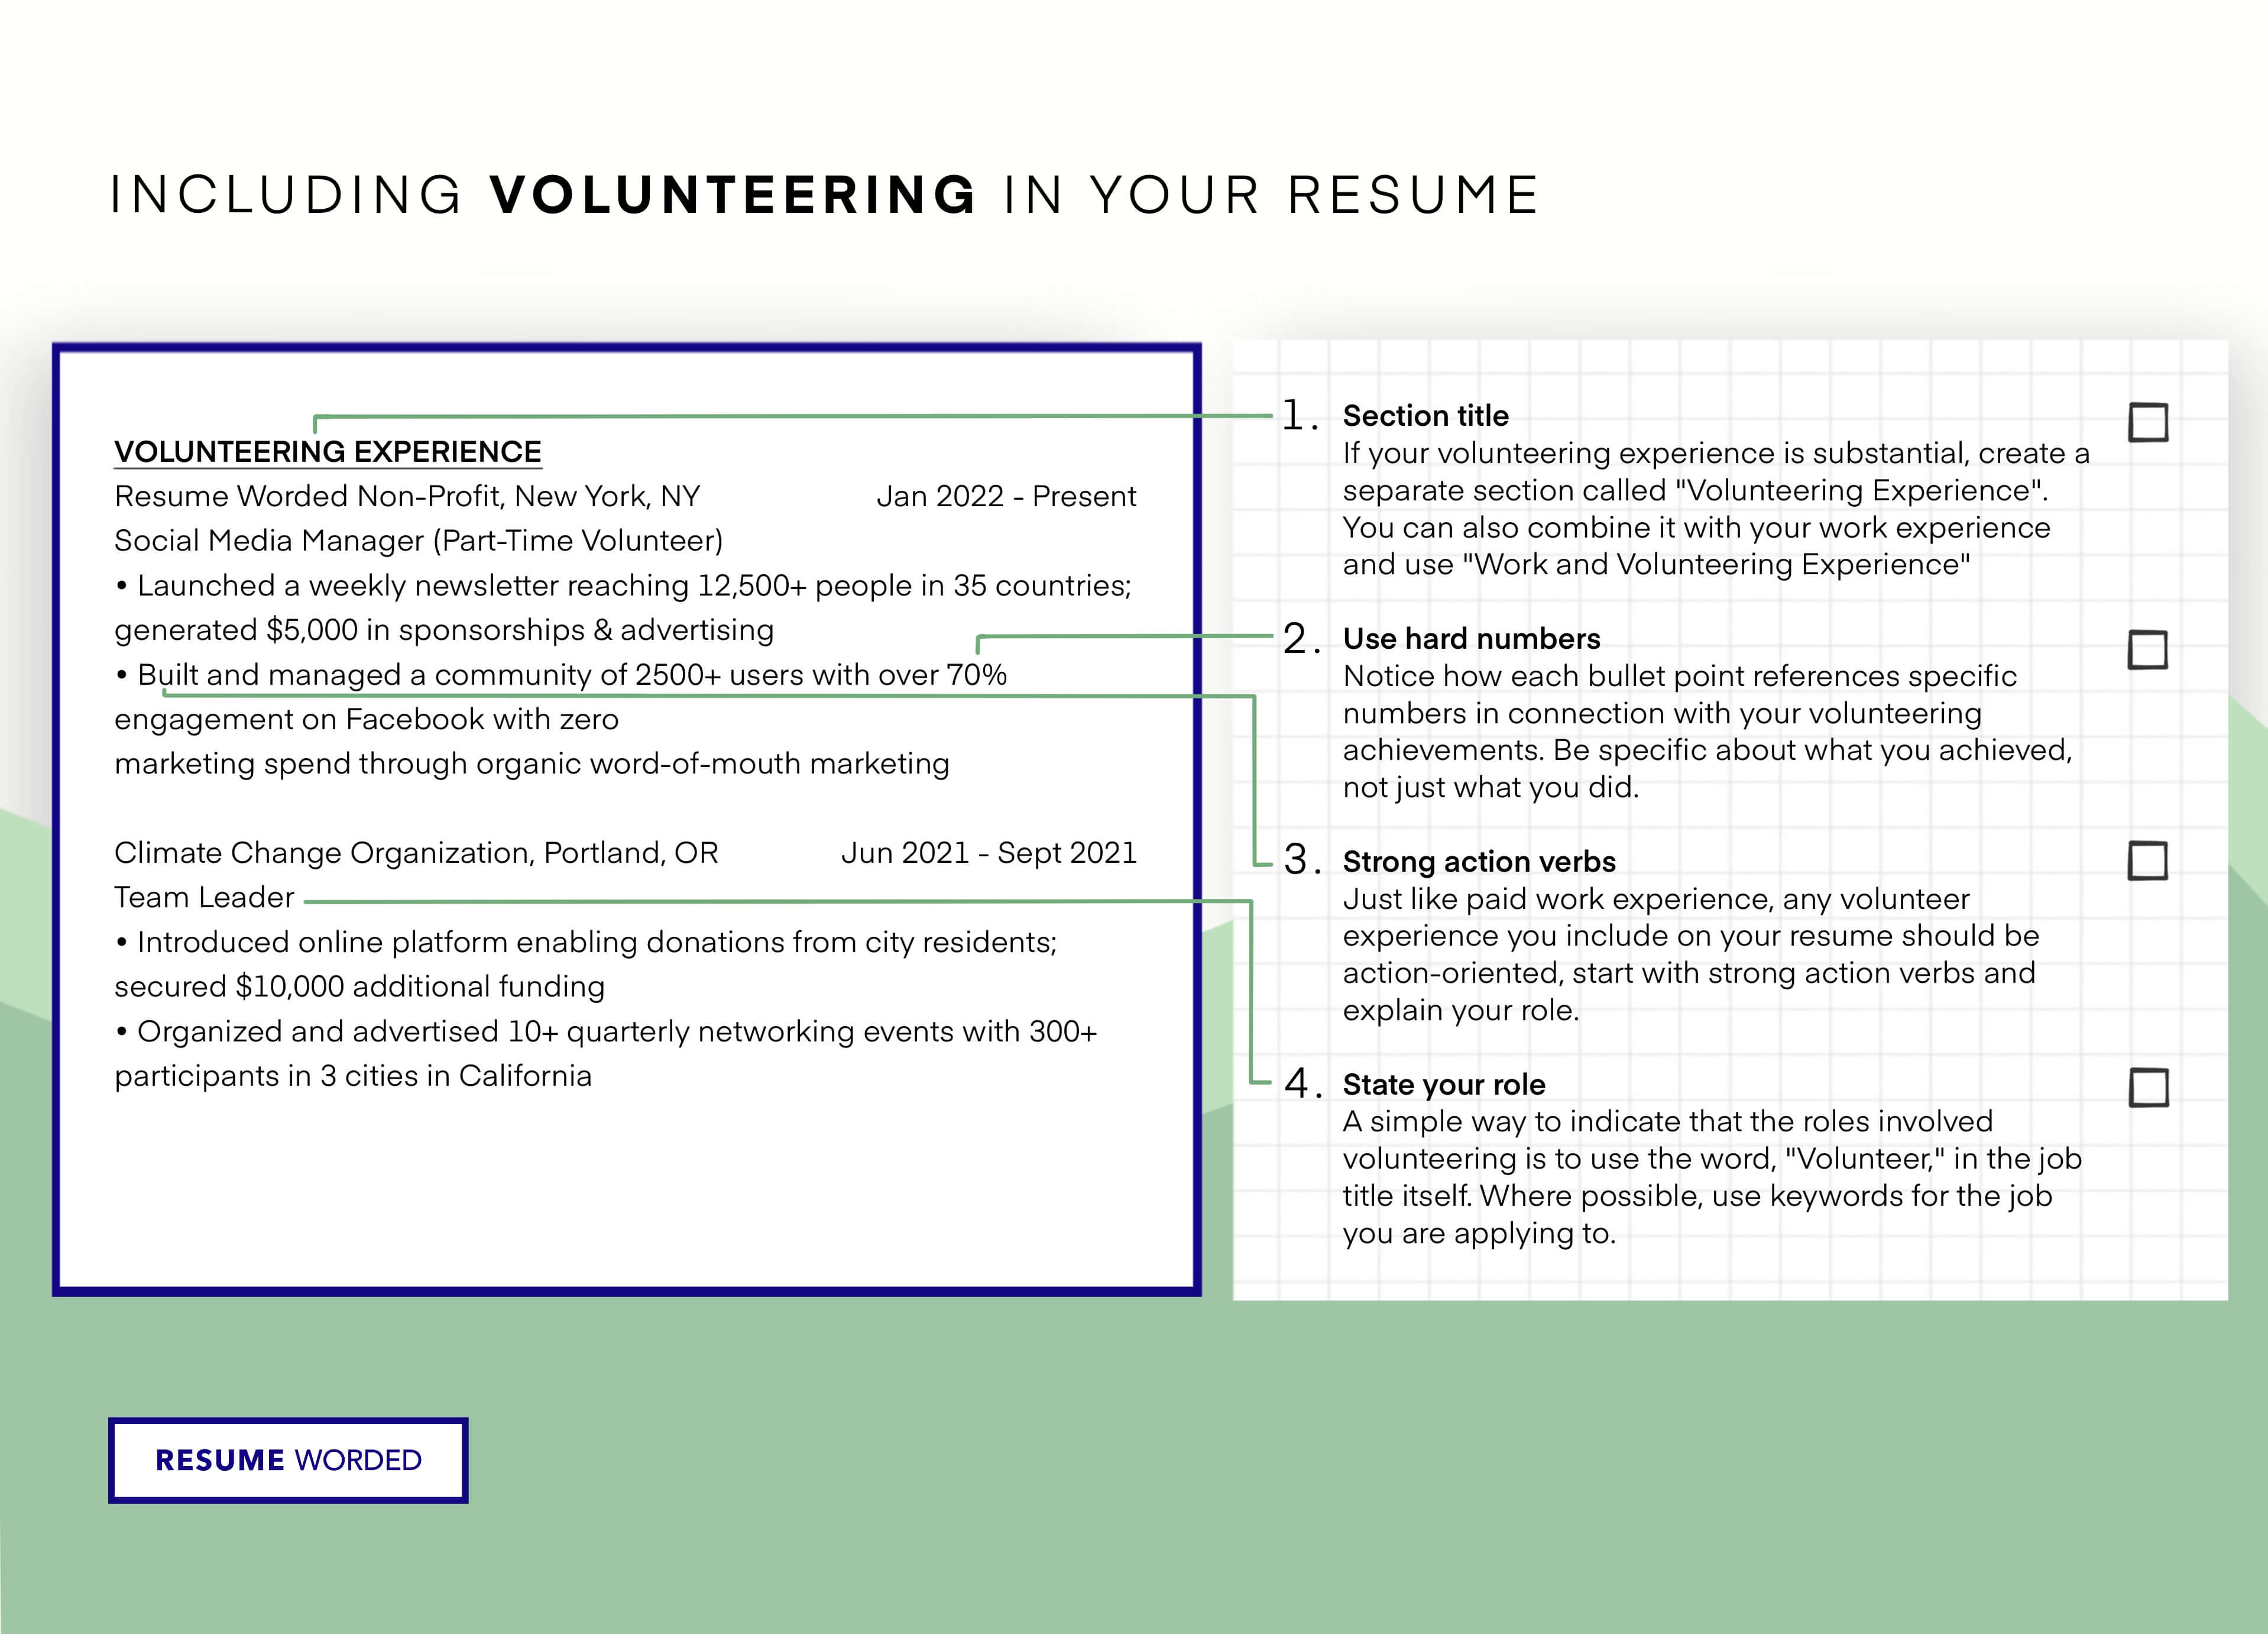 Mention any internship and volunteering experience, if applicable. - Clinical Social Worker Resume